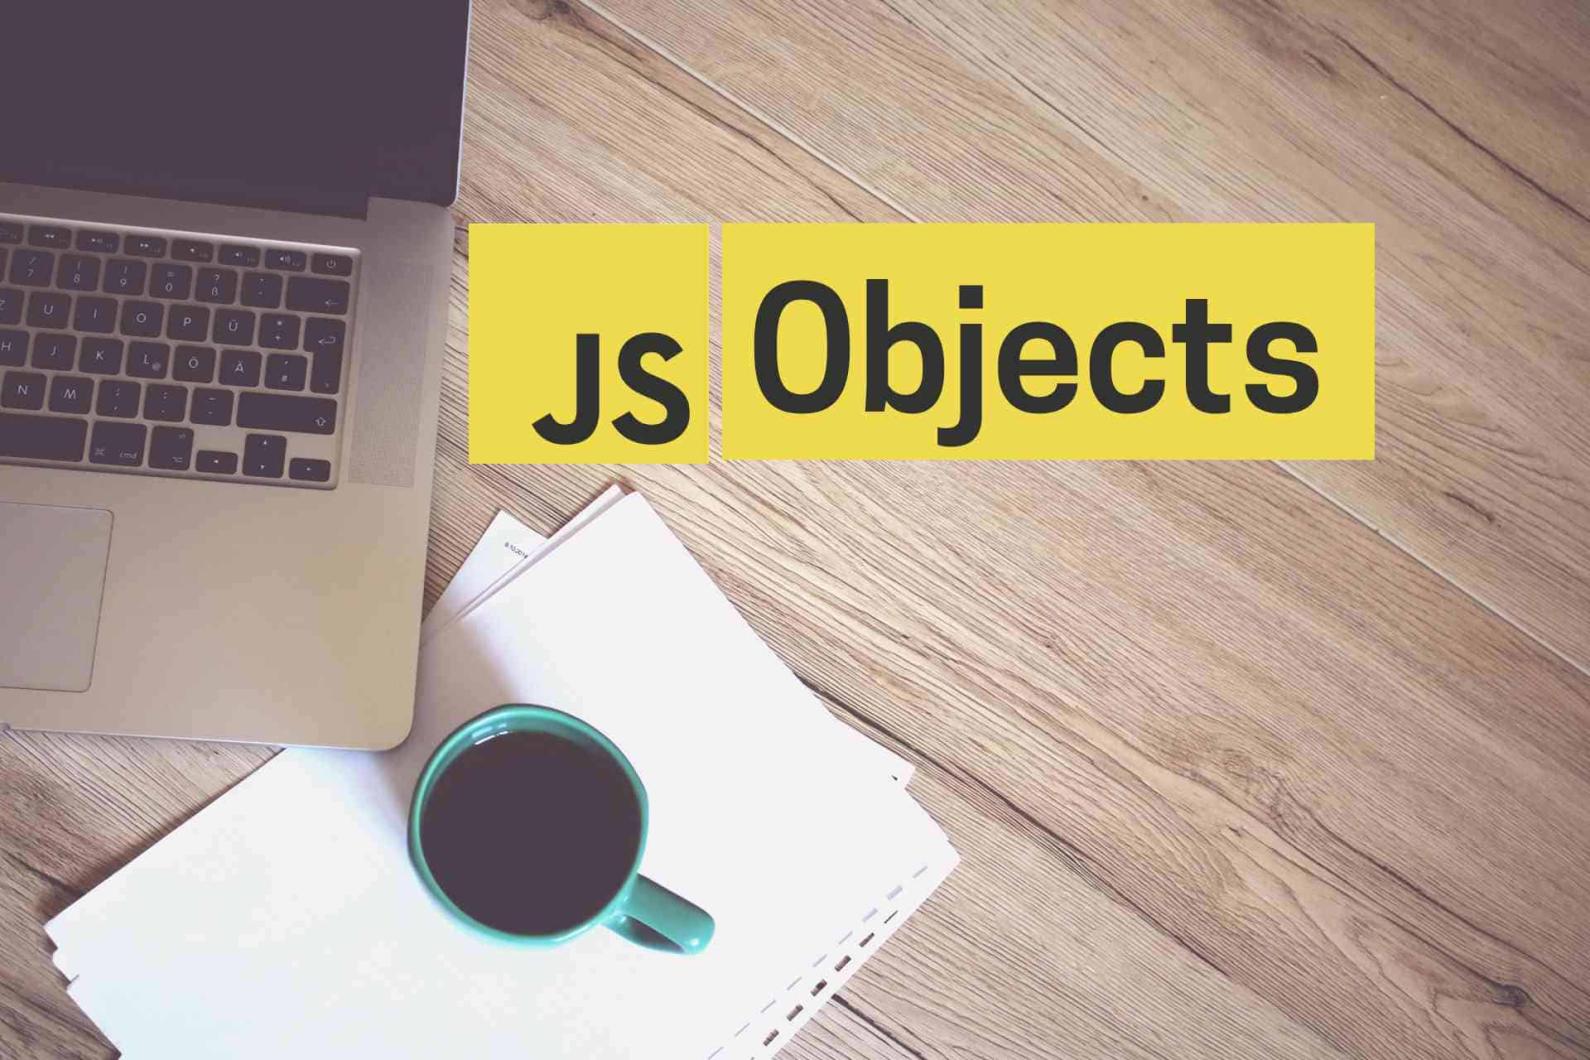 What Are the Different Properties and Methods of JavaScript Objects?